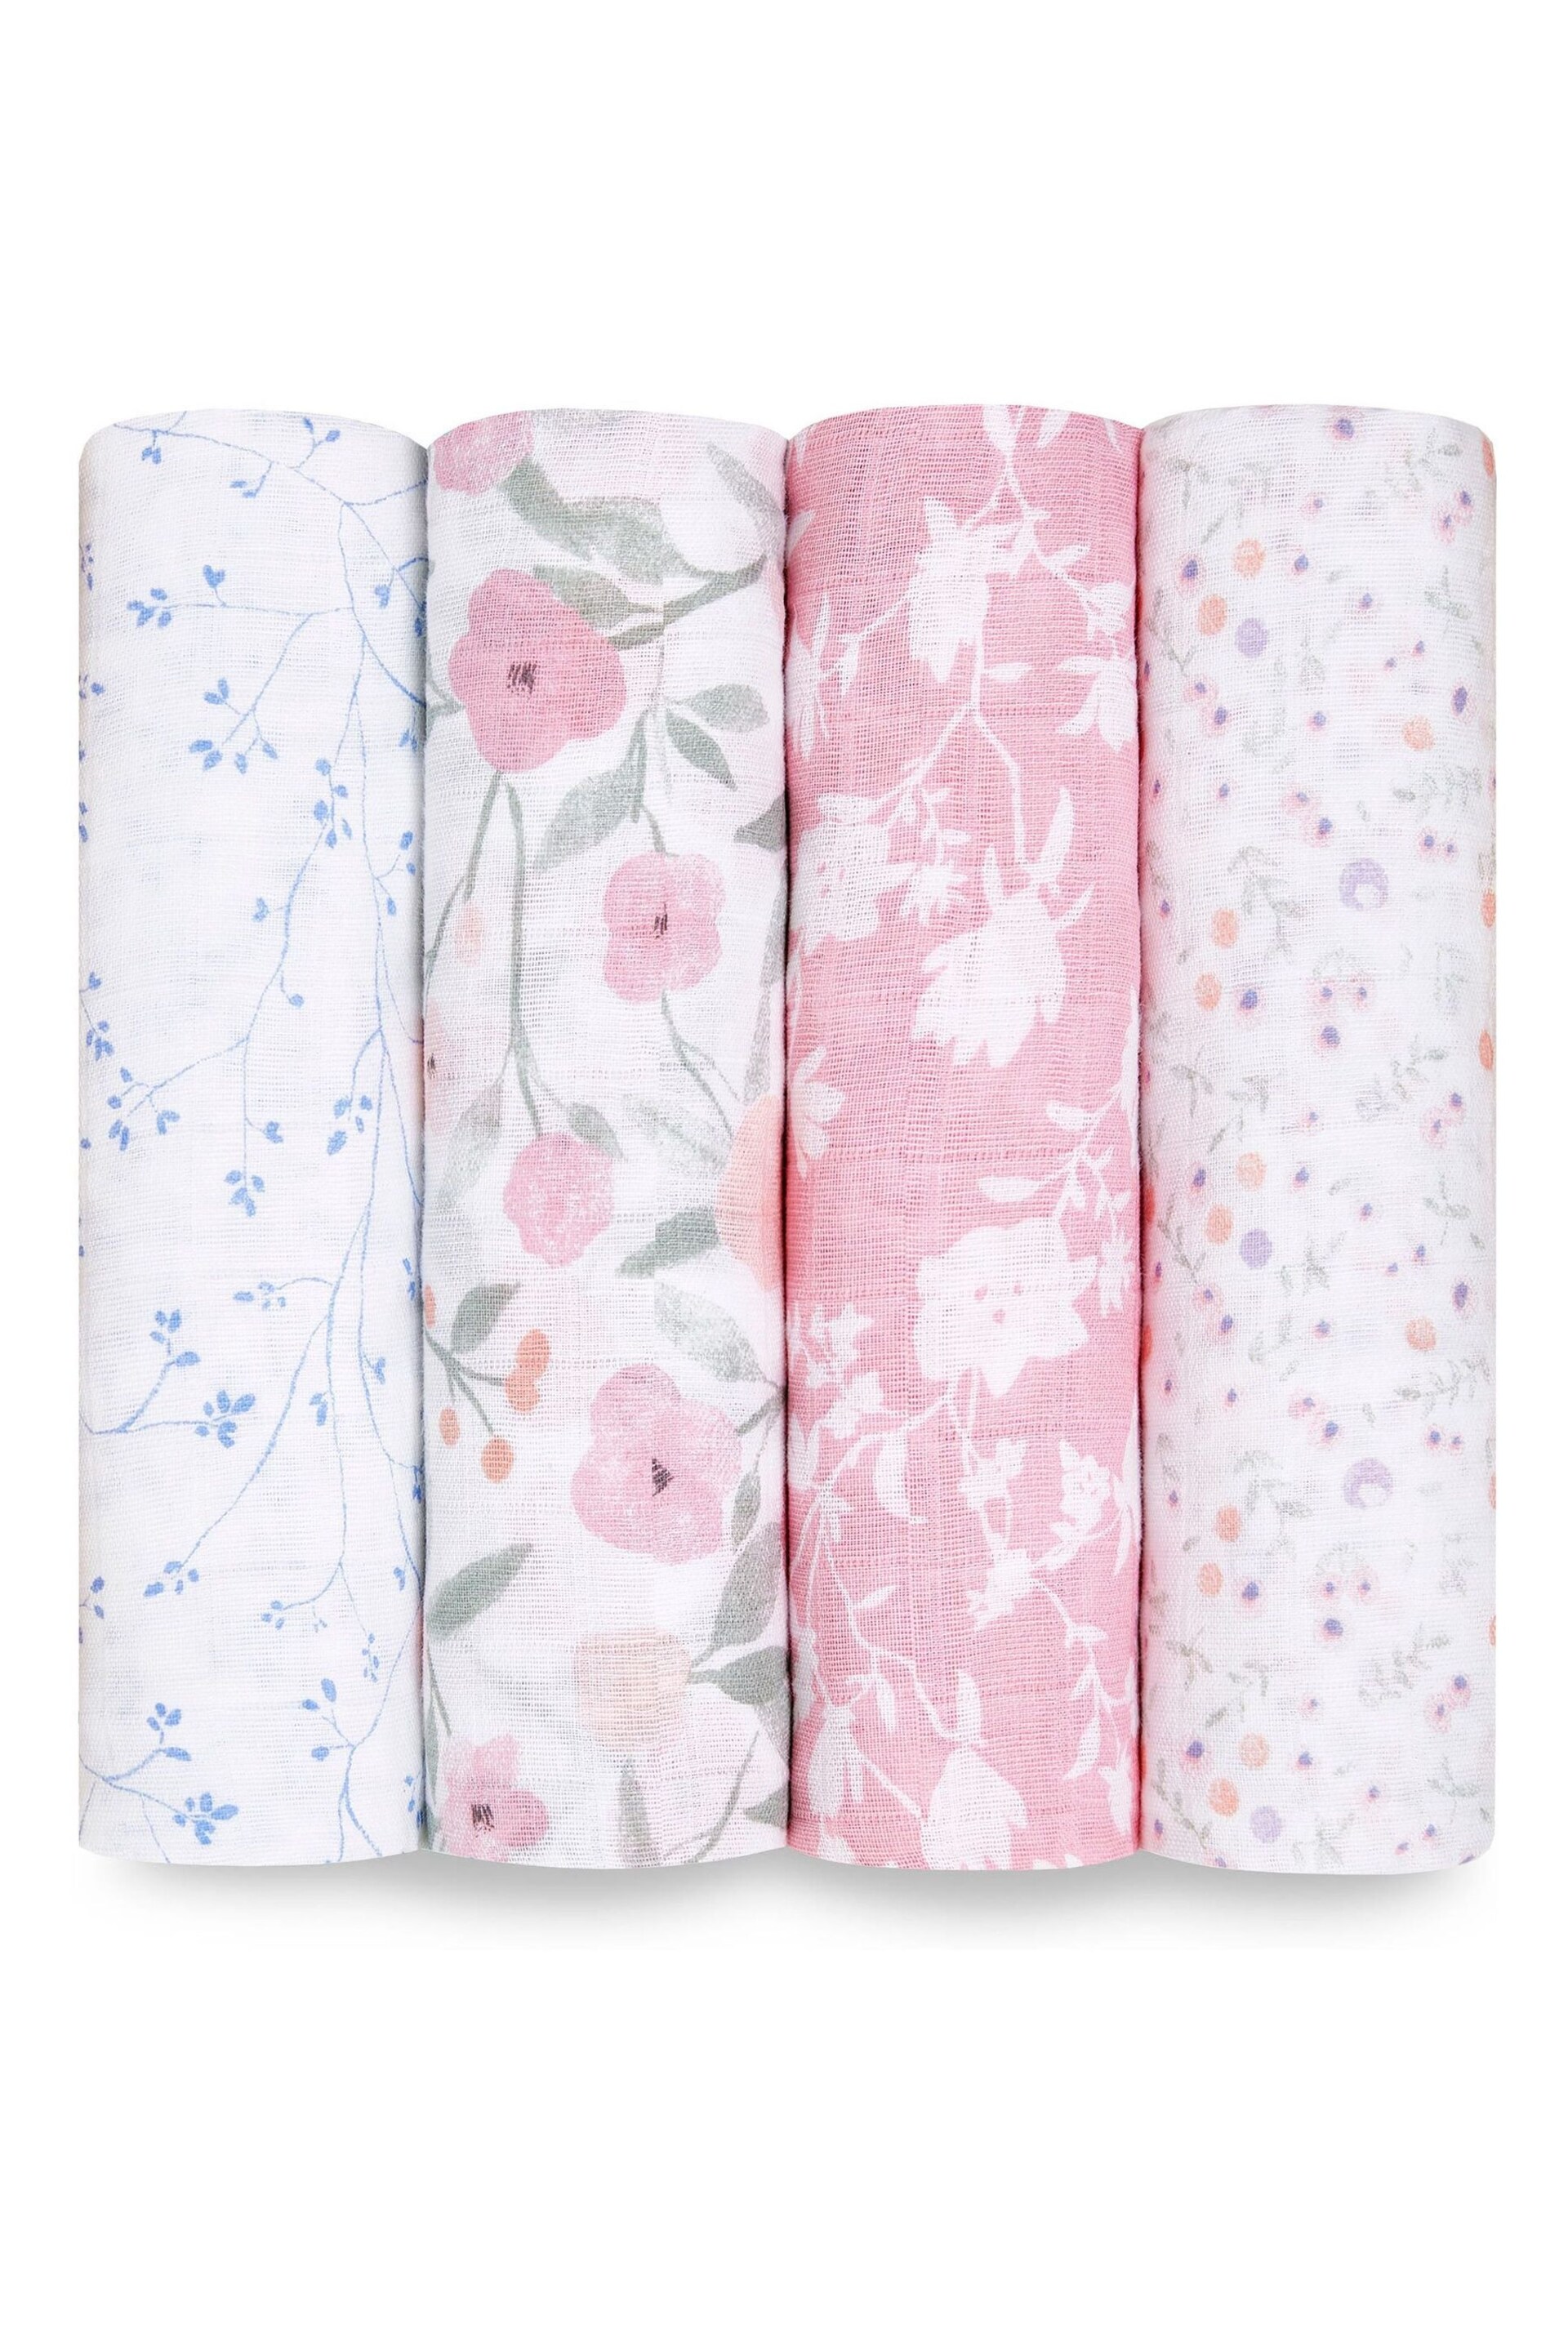 aden + anais ma fleur Large Cotton Muslin Blankets 4 Pack - Image 1 of 5